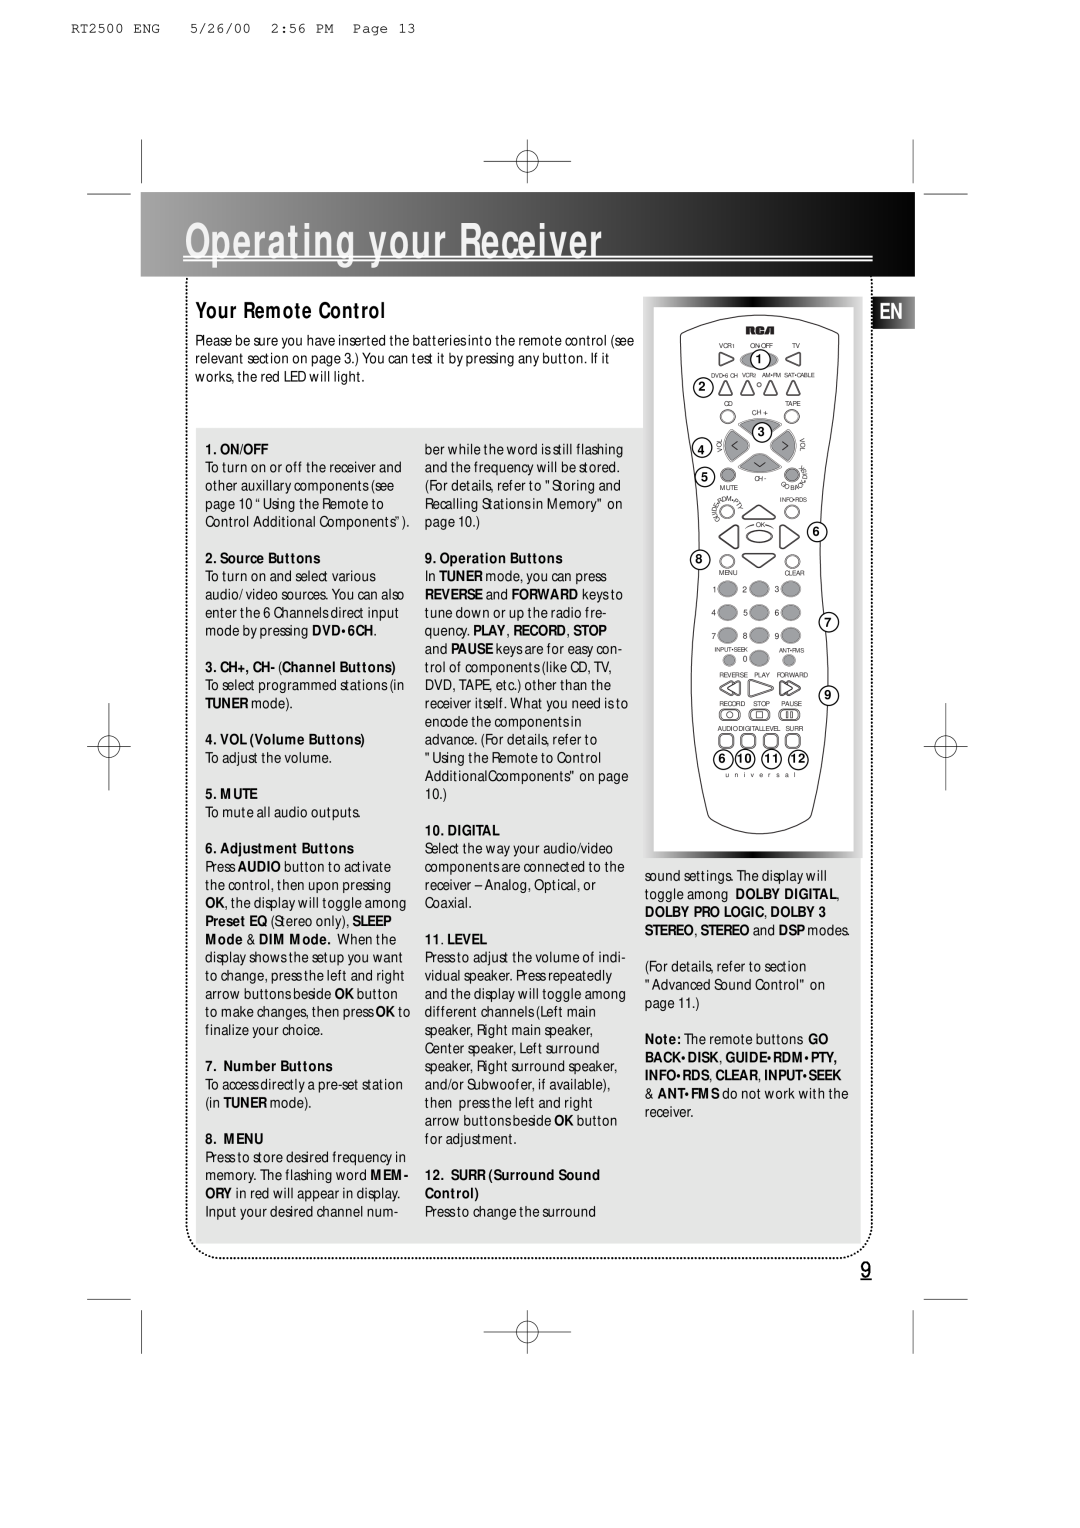 RCA RT2500R user manual Your Remote Control, OperatingyourReceiver 